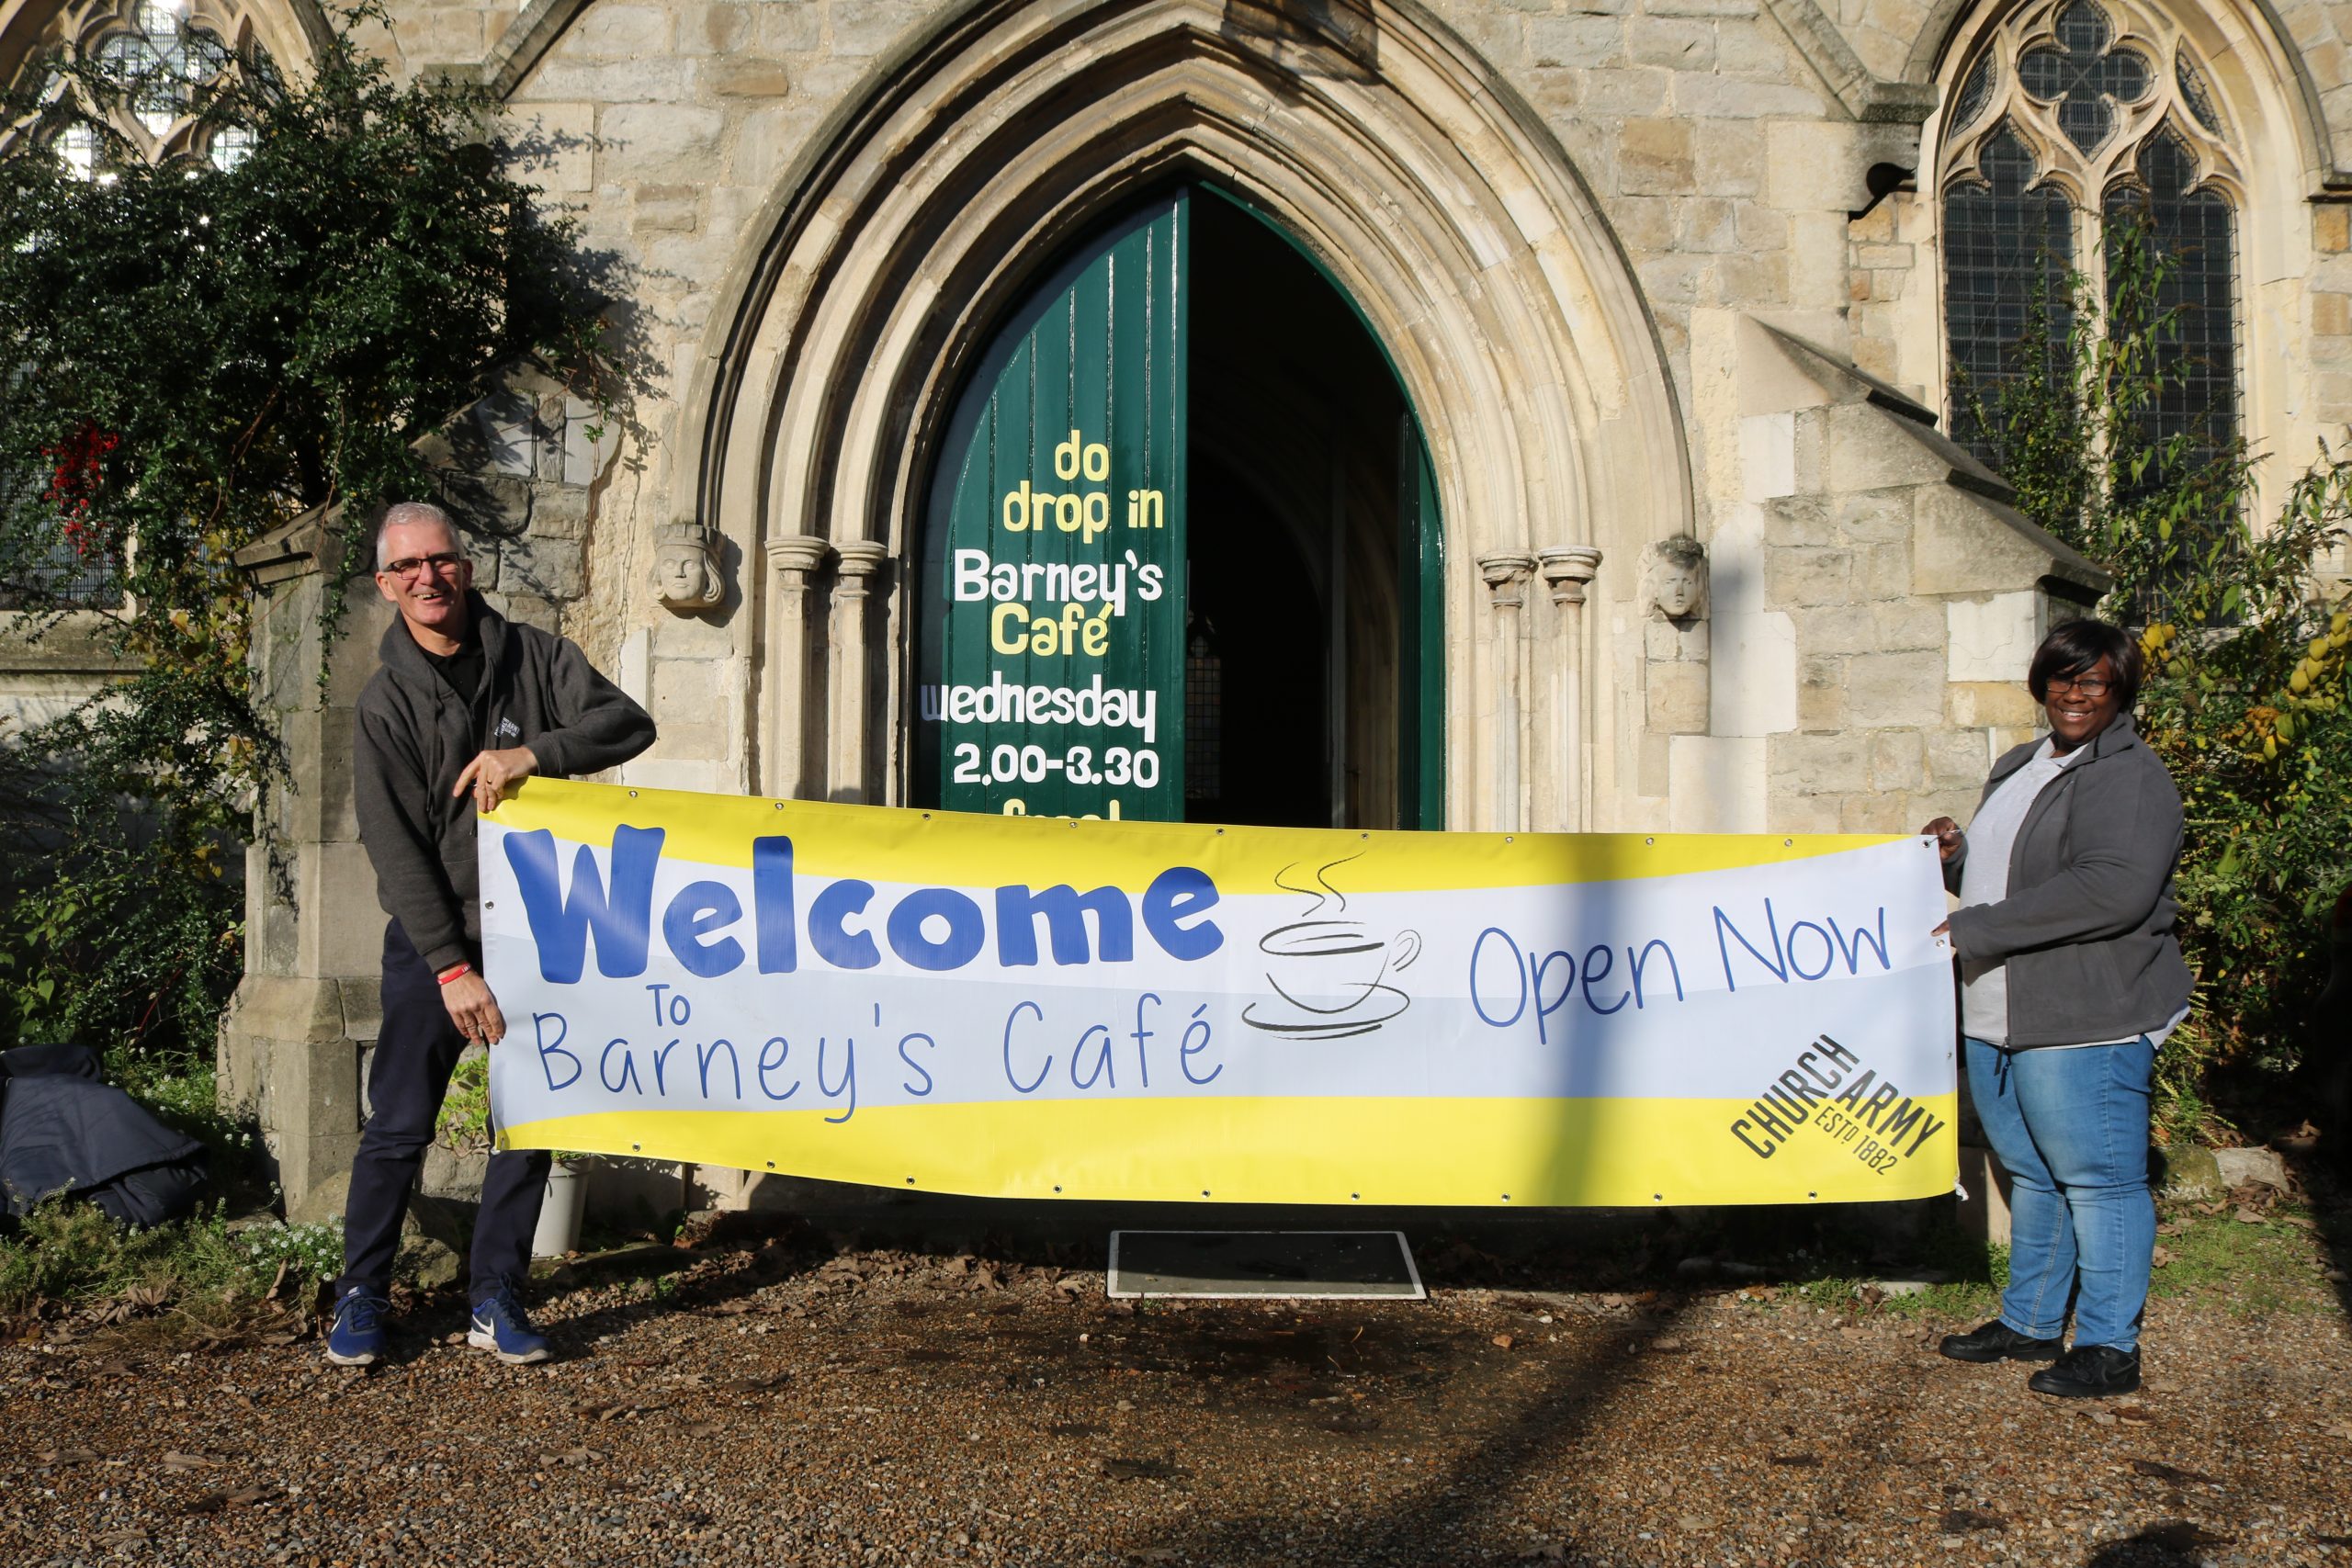 Stephen and Andrena holding a cafe welcome banner outside a church building